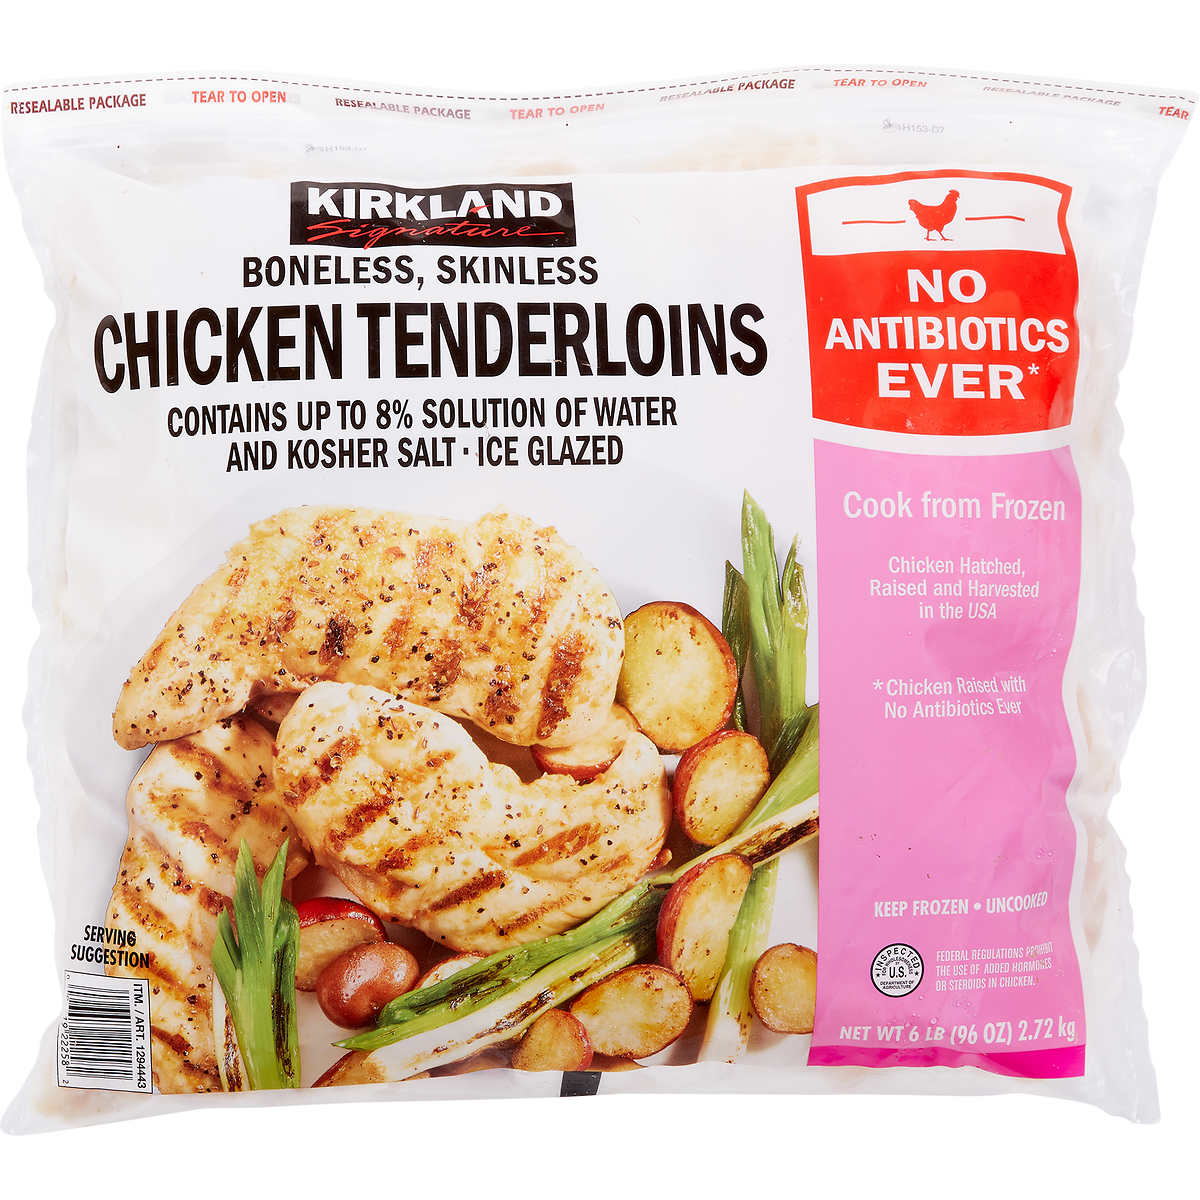 Where Does Costco Chicken Come From In 2022? (Guide)